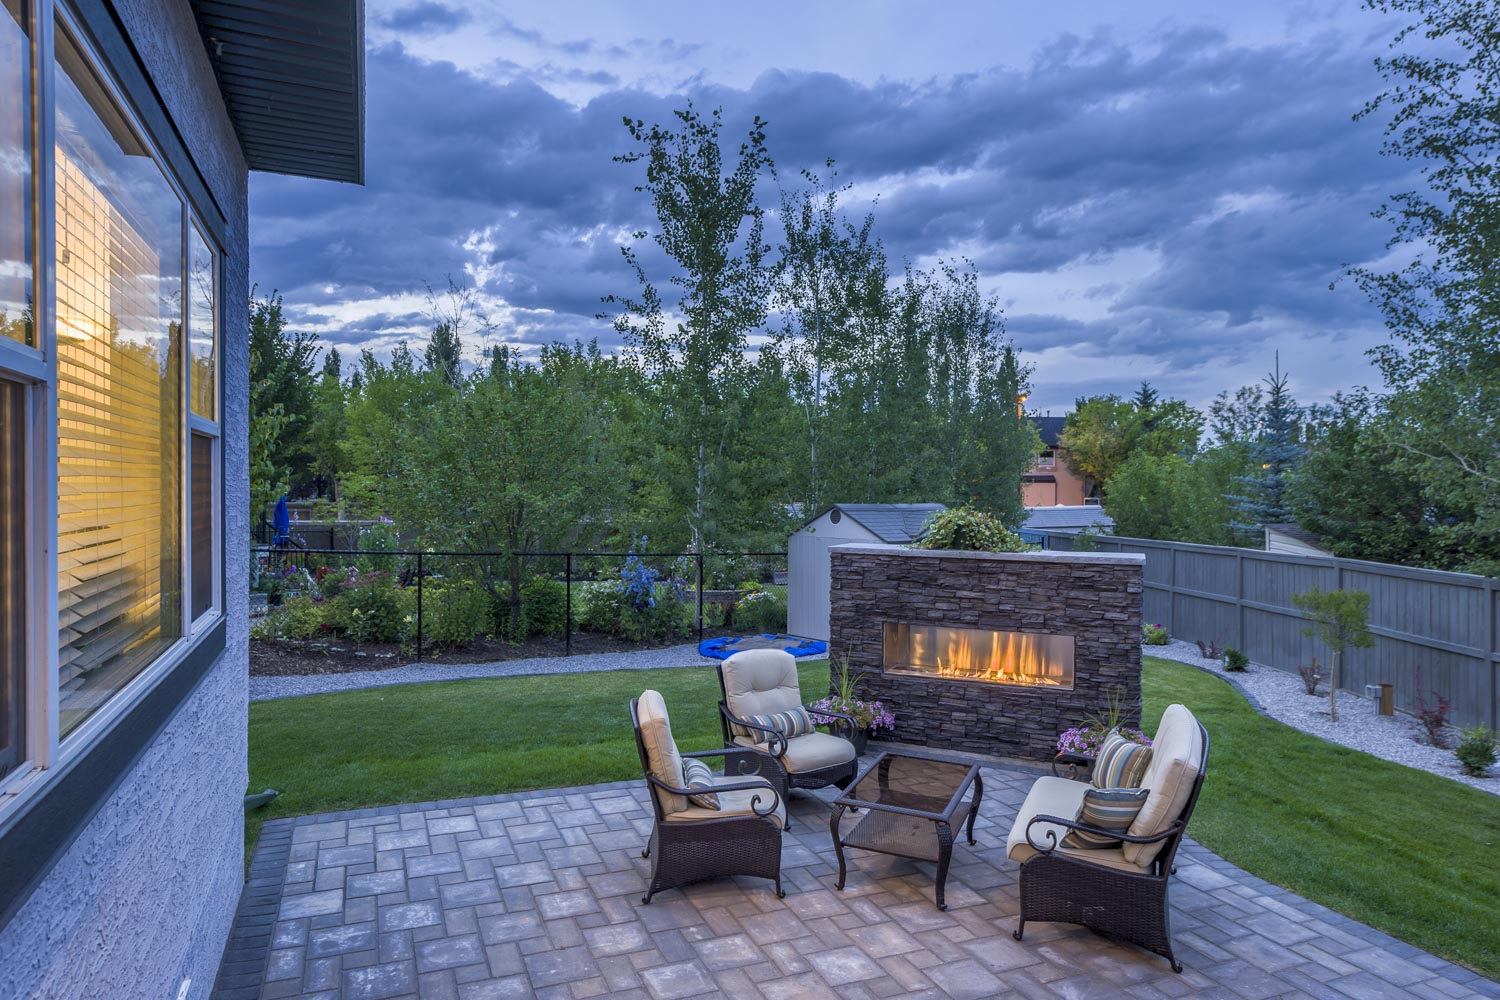 Fire Place At Night | Oasis Landscaping